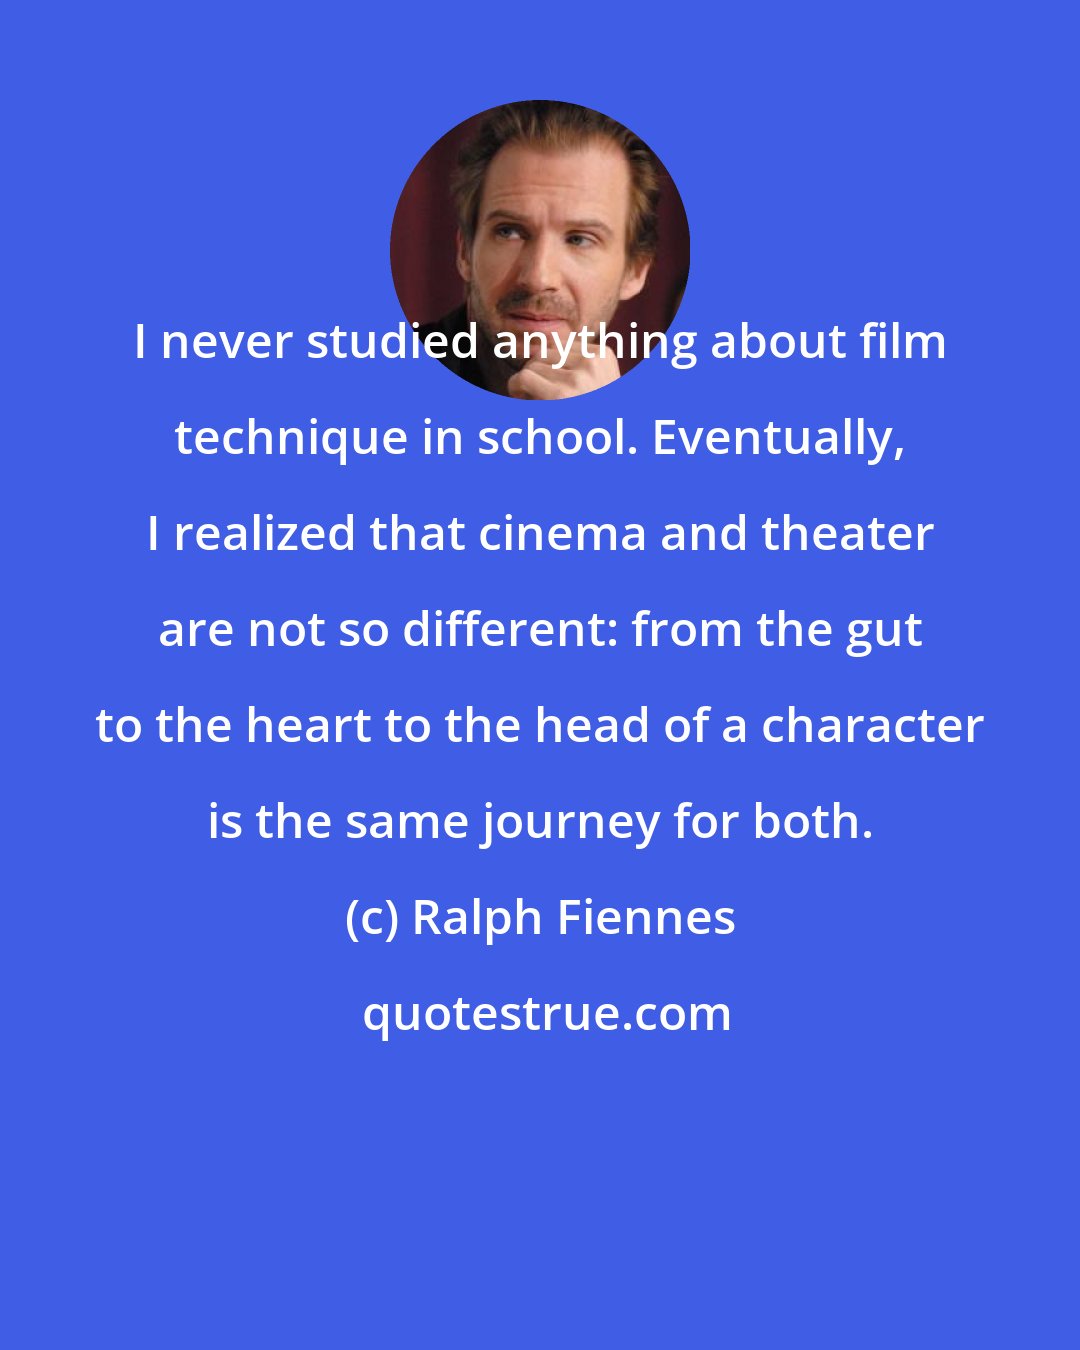 Ralph Fiennes: I never studied anything about film technique in school. Eventually, I realized that cinema and theater are not so different: from the gut to the heart to the head of a character is the same journey for both.